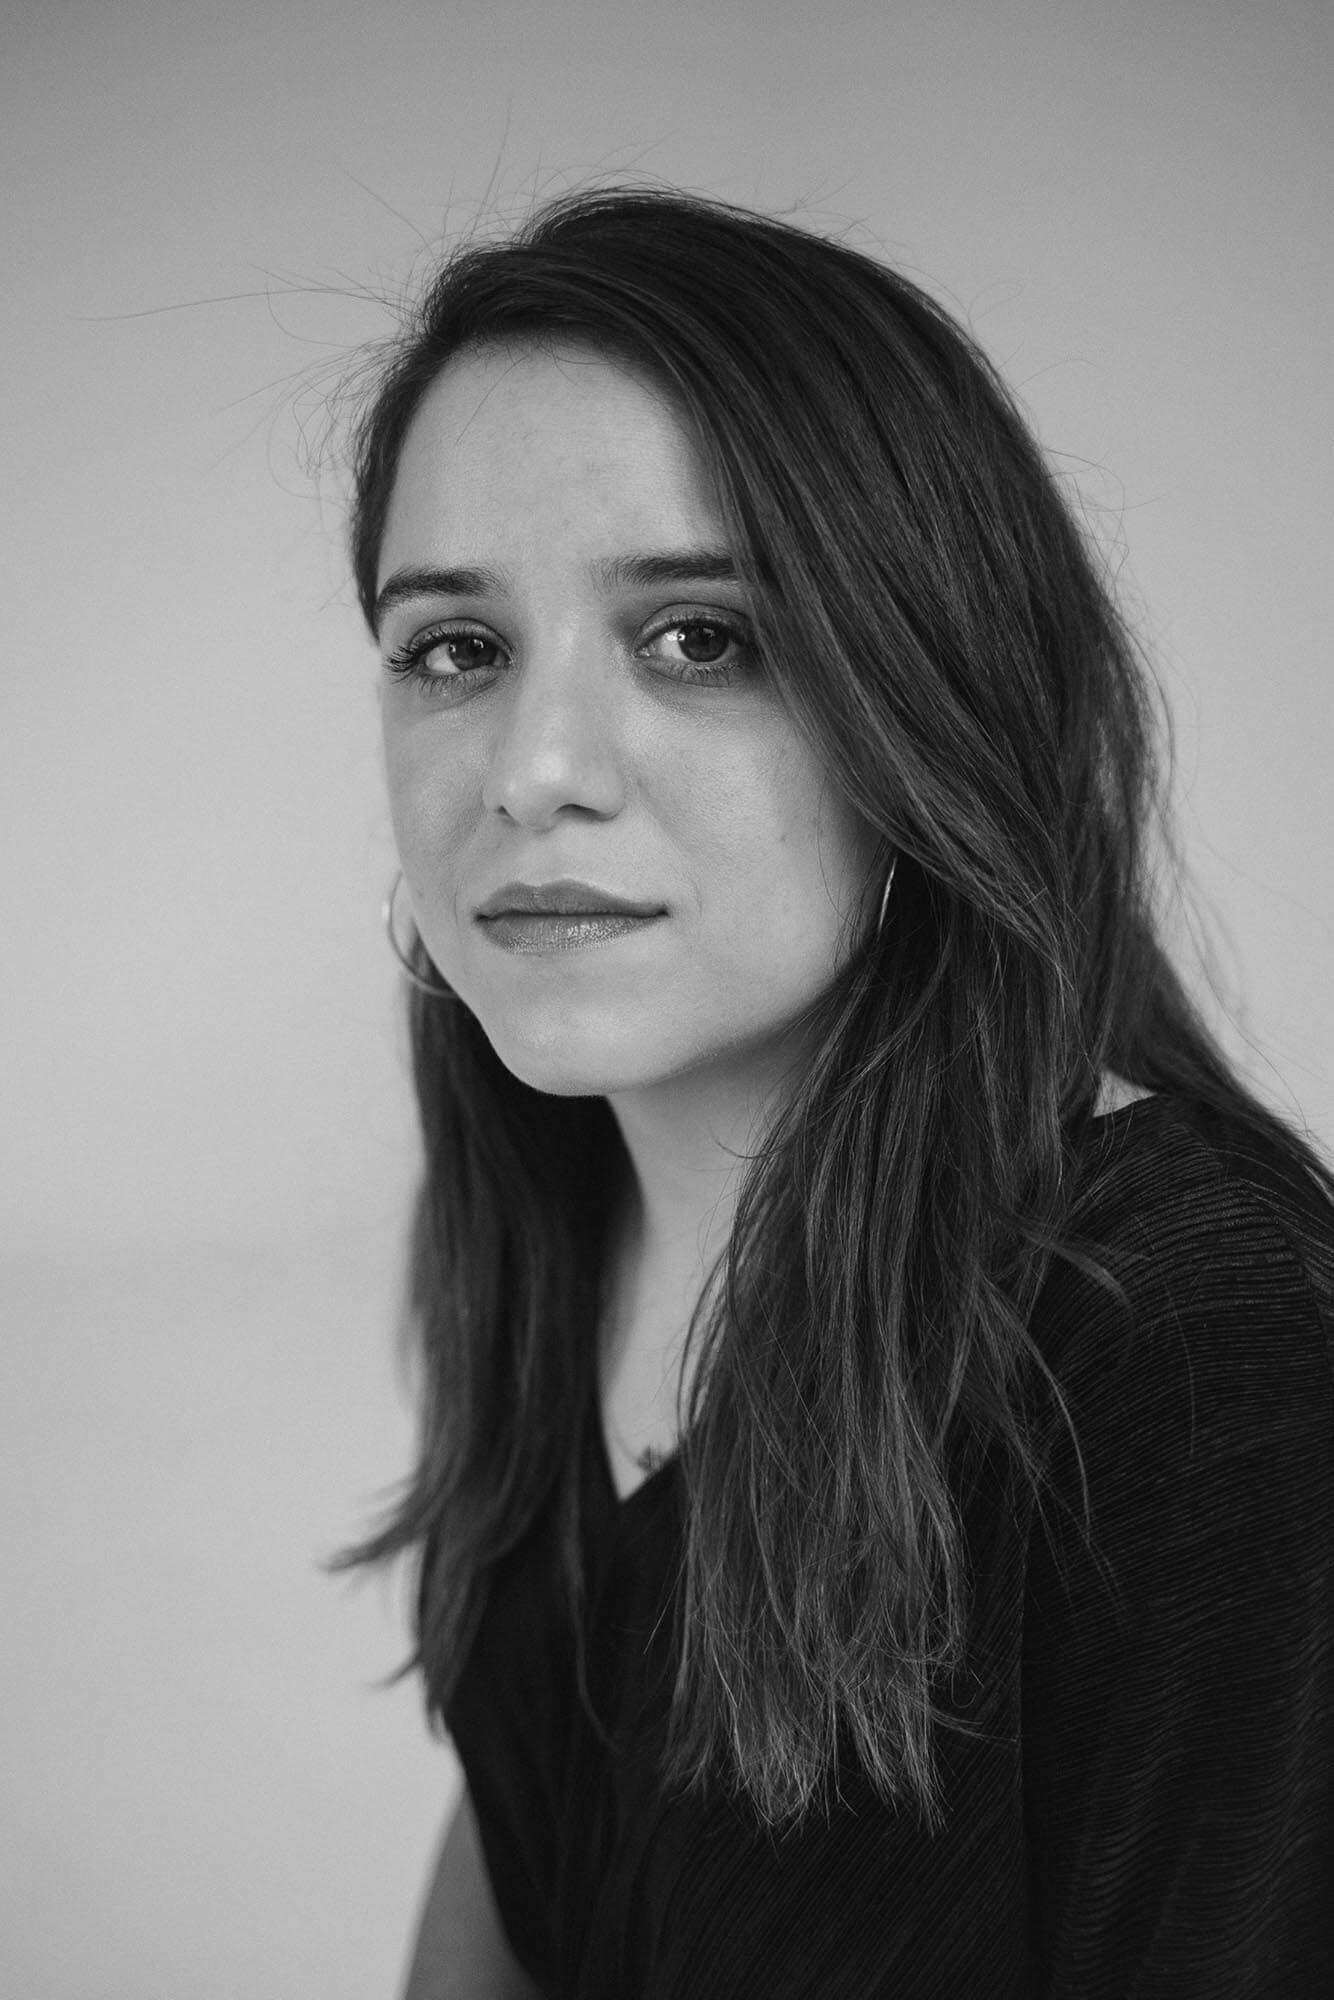 Isabel Castro looks at the camera. Black and white portrait.